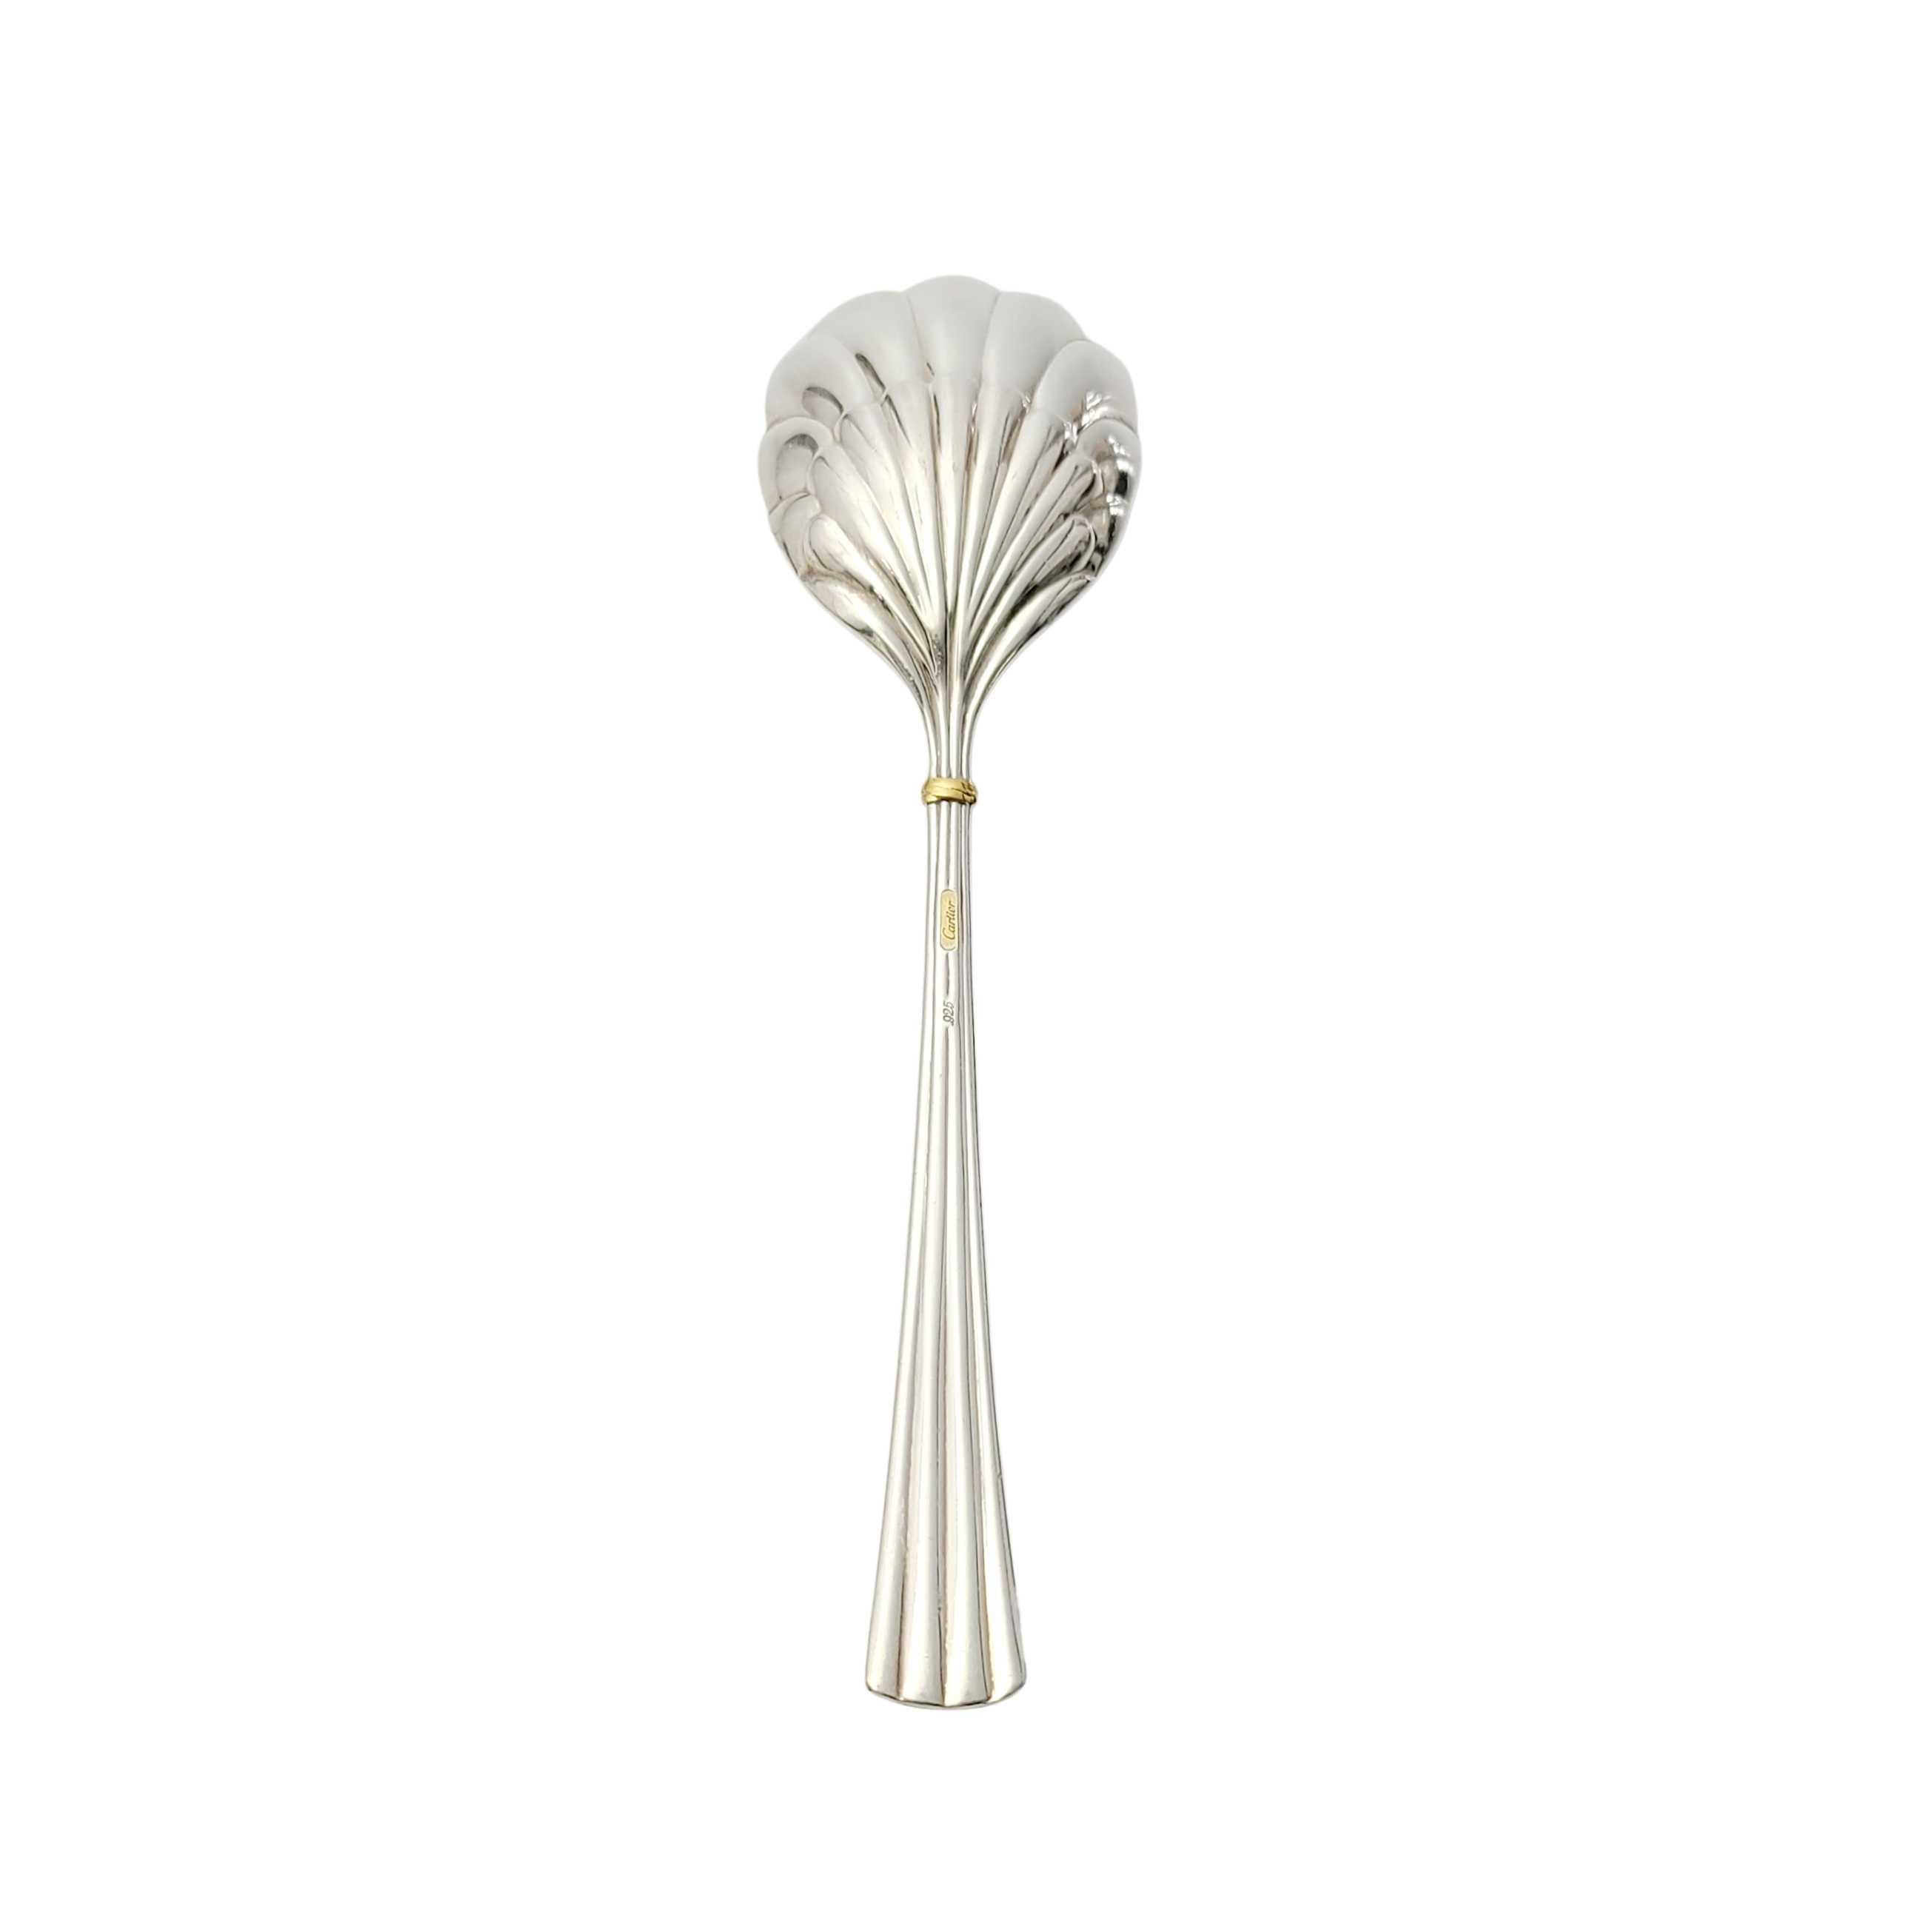 Vintage sterling silver sugar shell bowl sugar spoon by Cartier.

No monogram.

Cartier's Des Must pattern features a simple and timeless rubbed design with a small gold accent. Shell bowl.

Measures 6 1/4